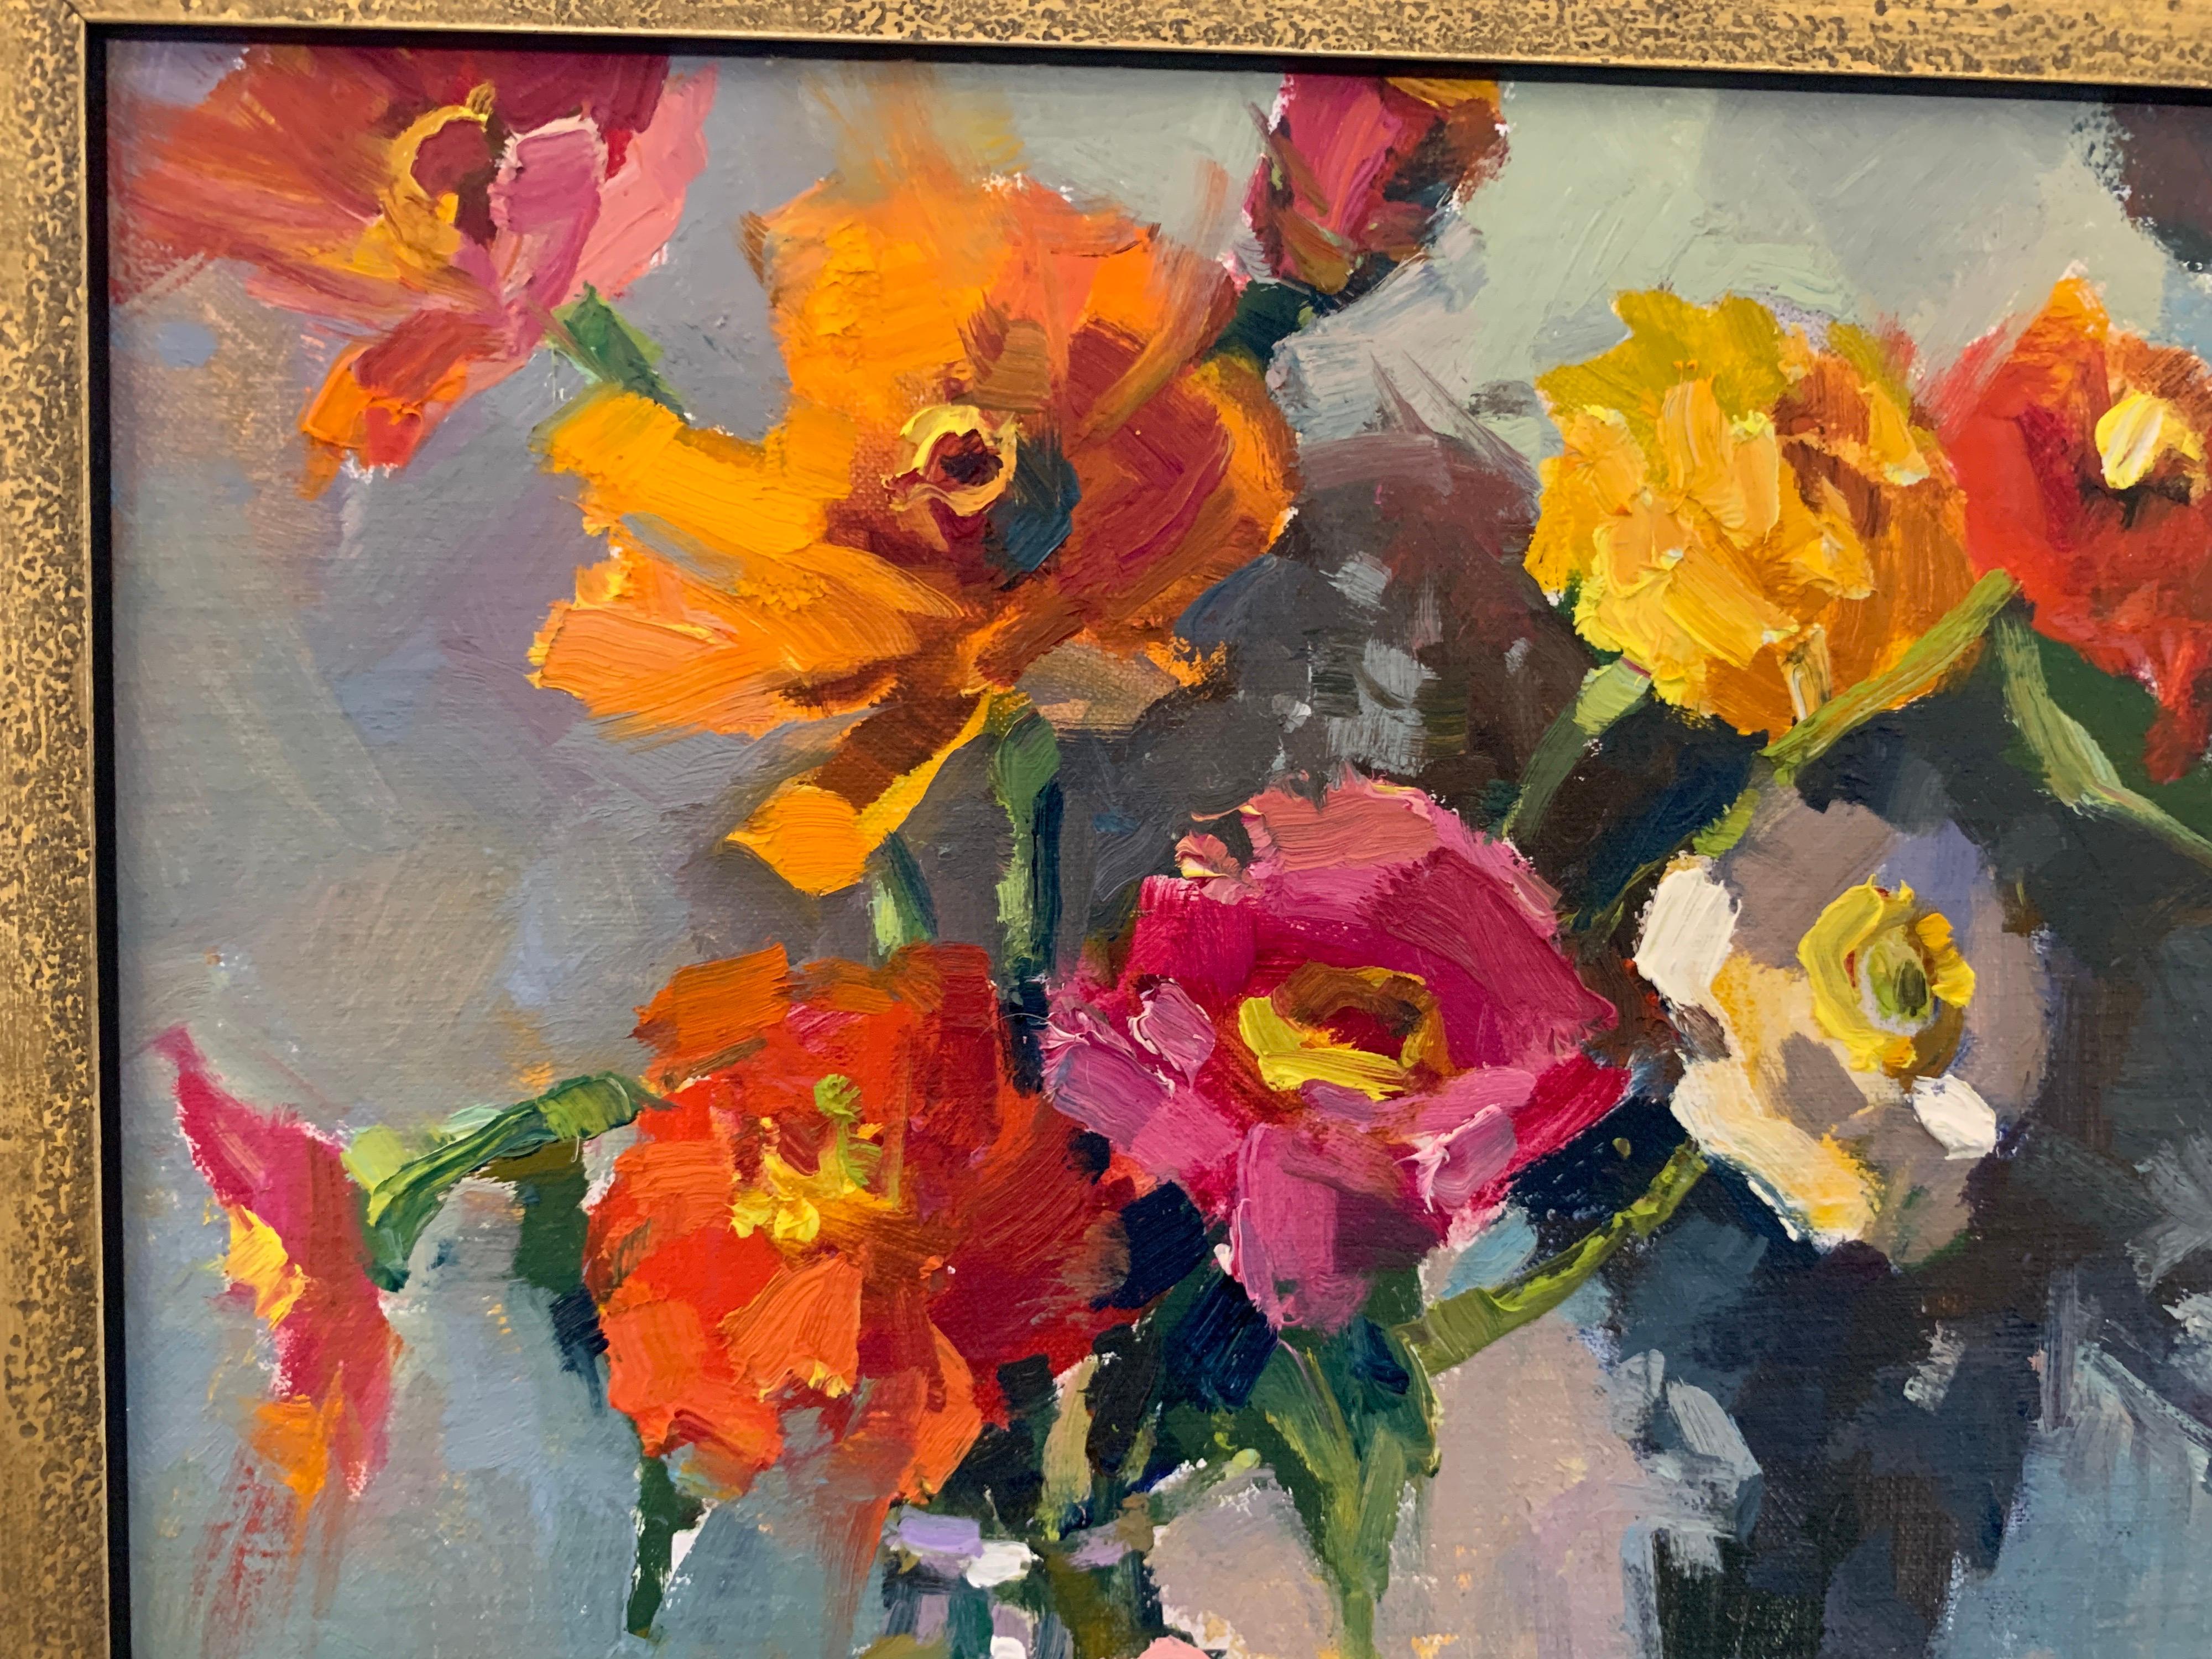 Fleurs III by Millie Gosch, Small Framed Oil on Board Still-Life Painting 2